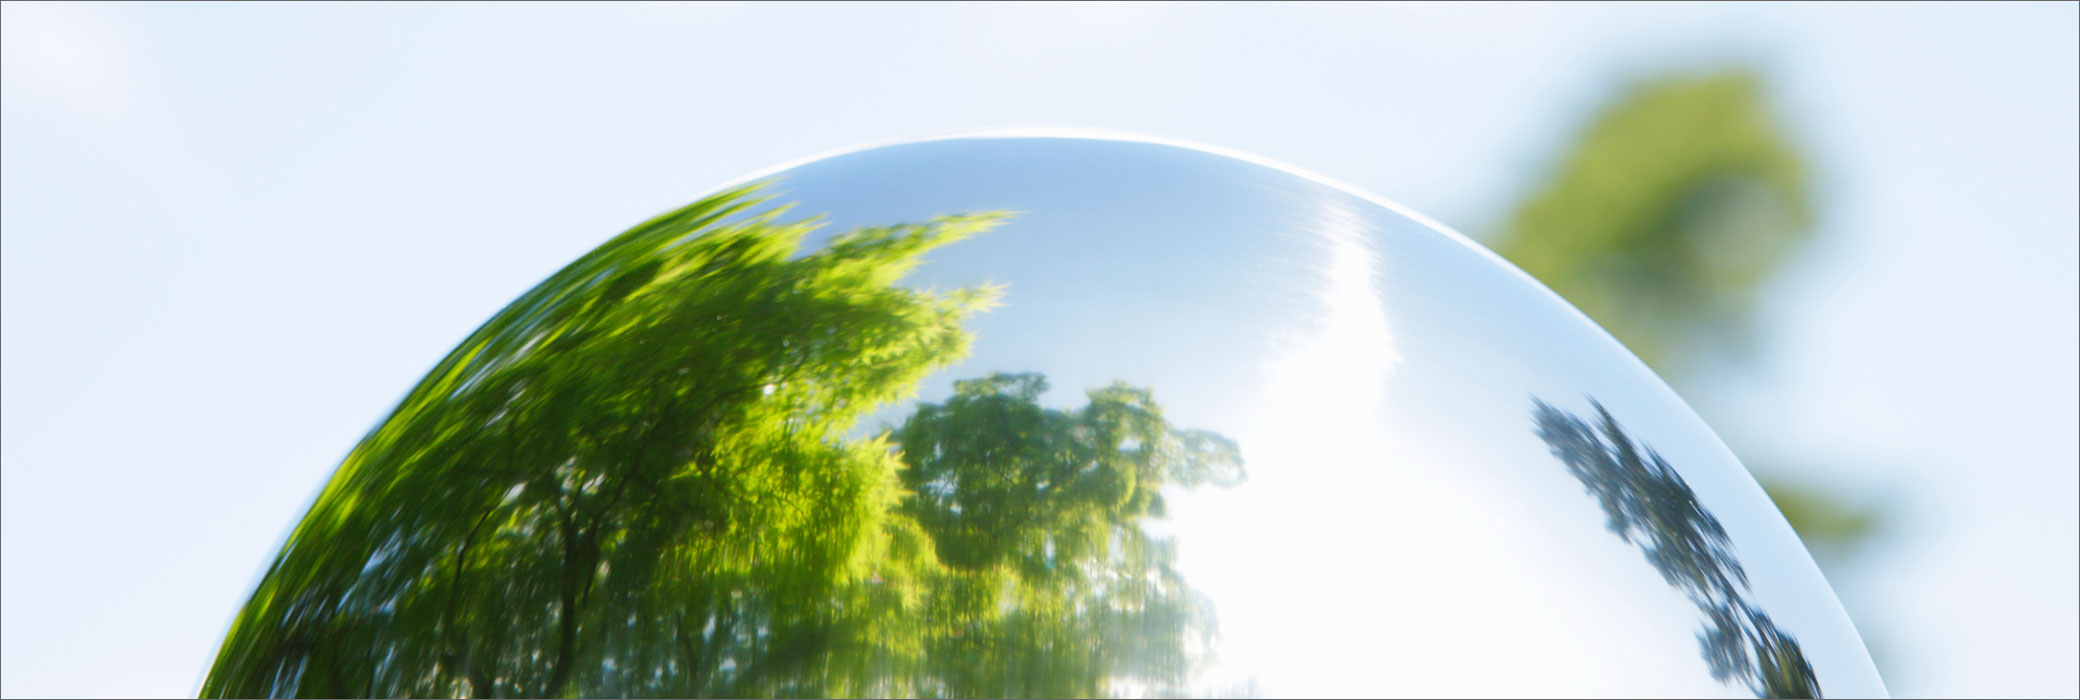 Mirror Half Sphere with Reflection of Trees and Sky